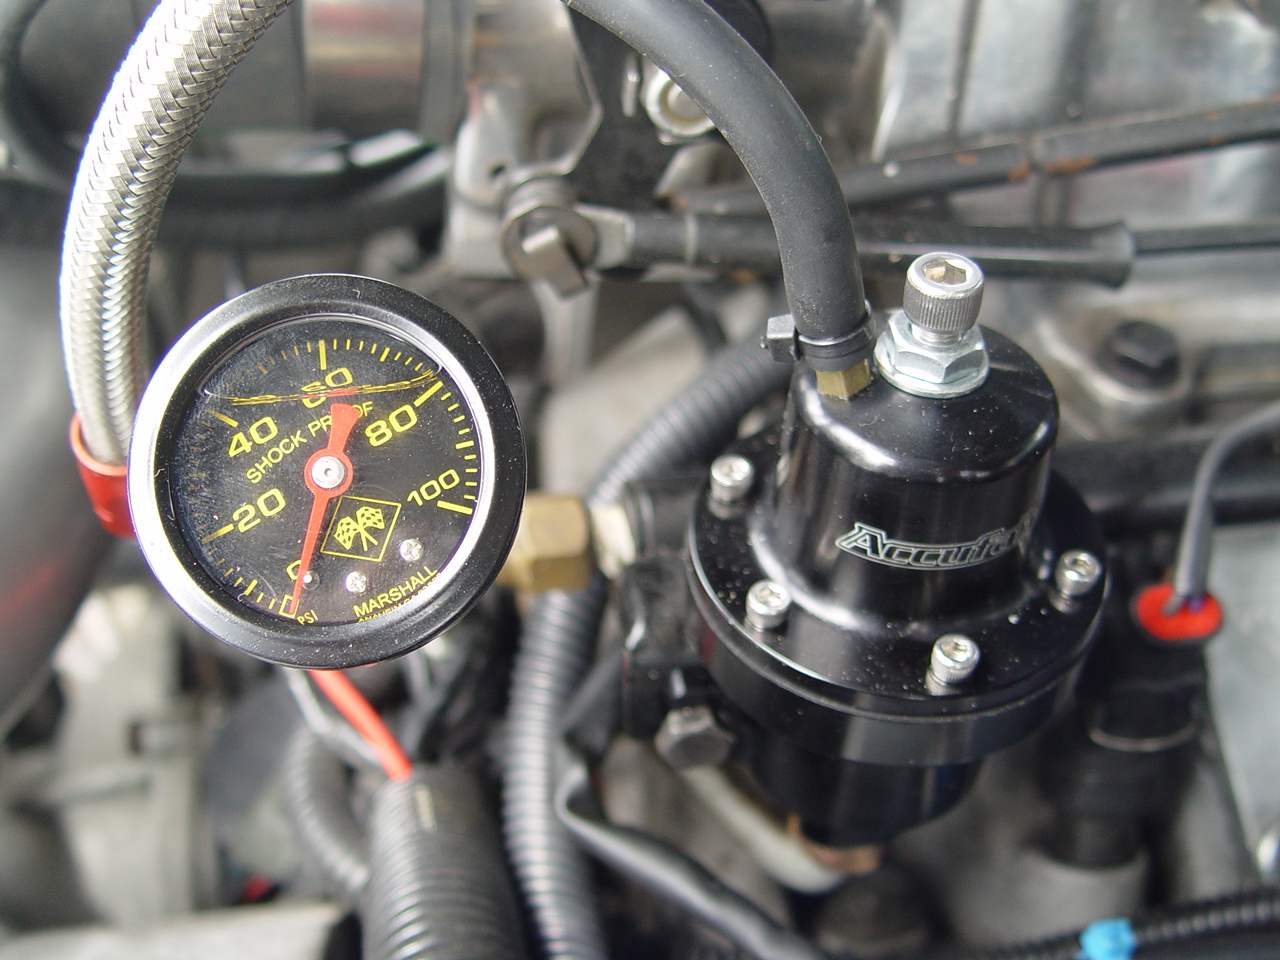 Installing a Fuel Pressure Gauge on the Fuel Rail of Your Buick Turbo Regal